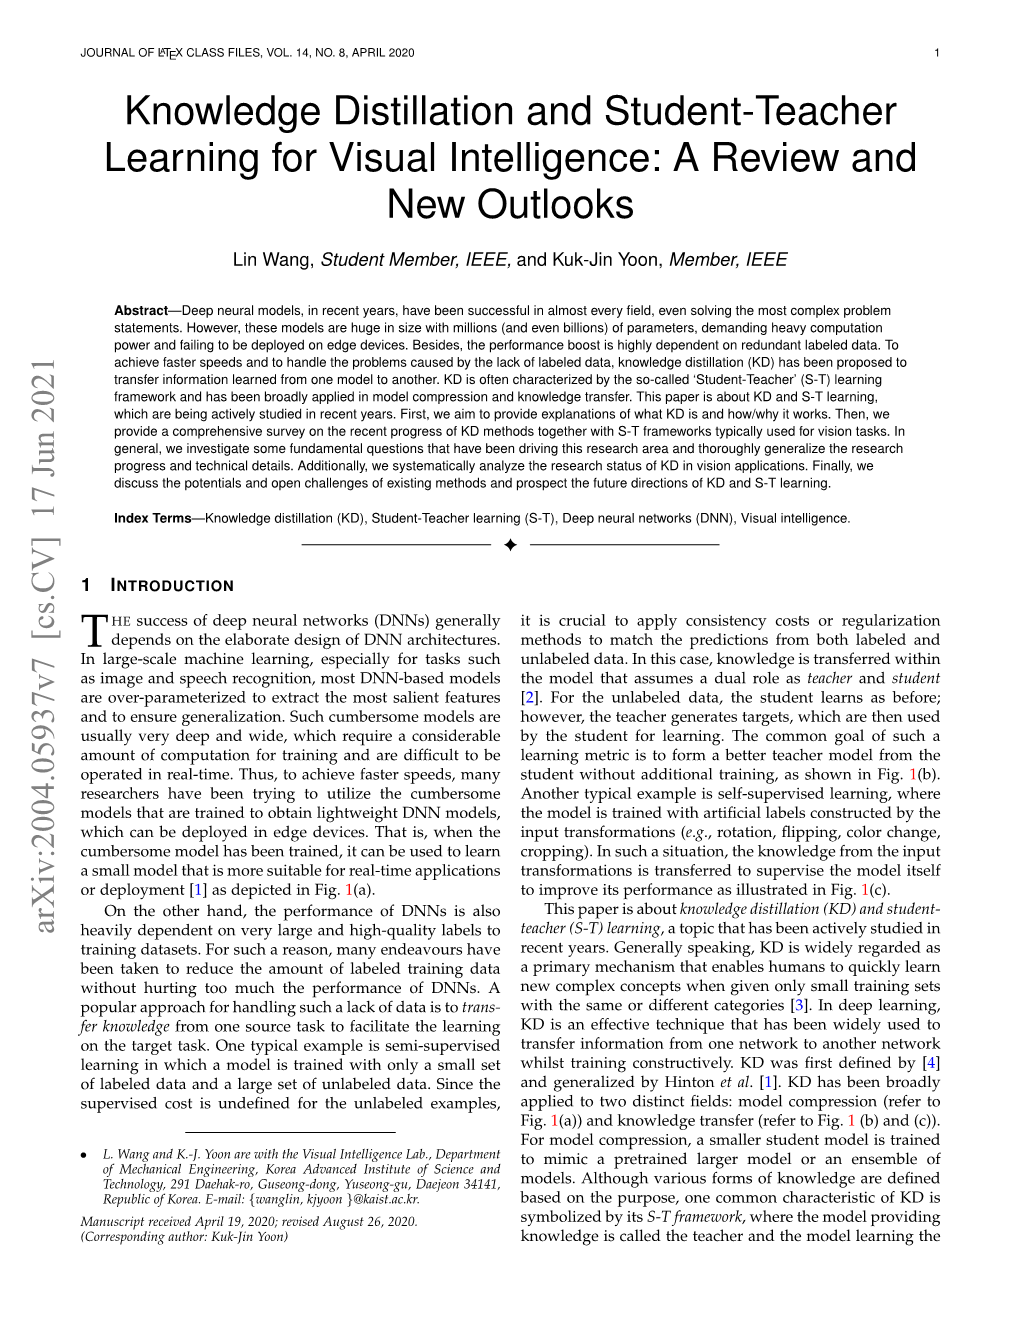 Knowledge Distillation and Student-Teacher Learning for Visual Intelligence: a Review and New Outlooks